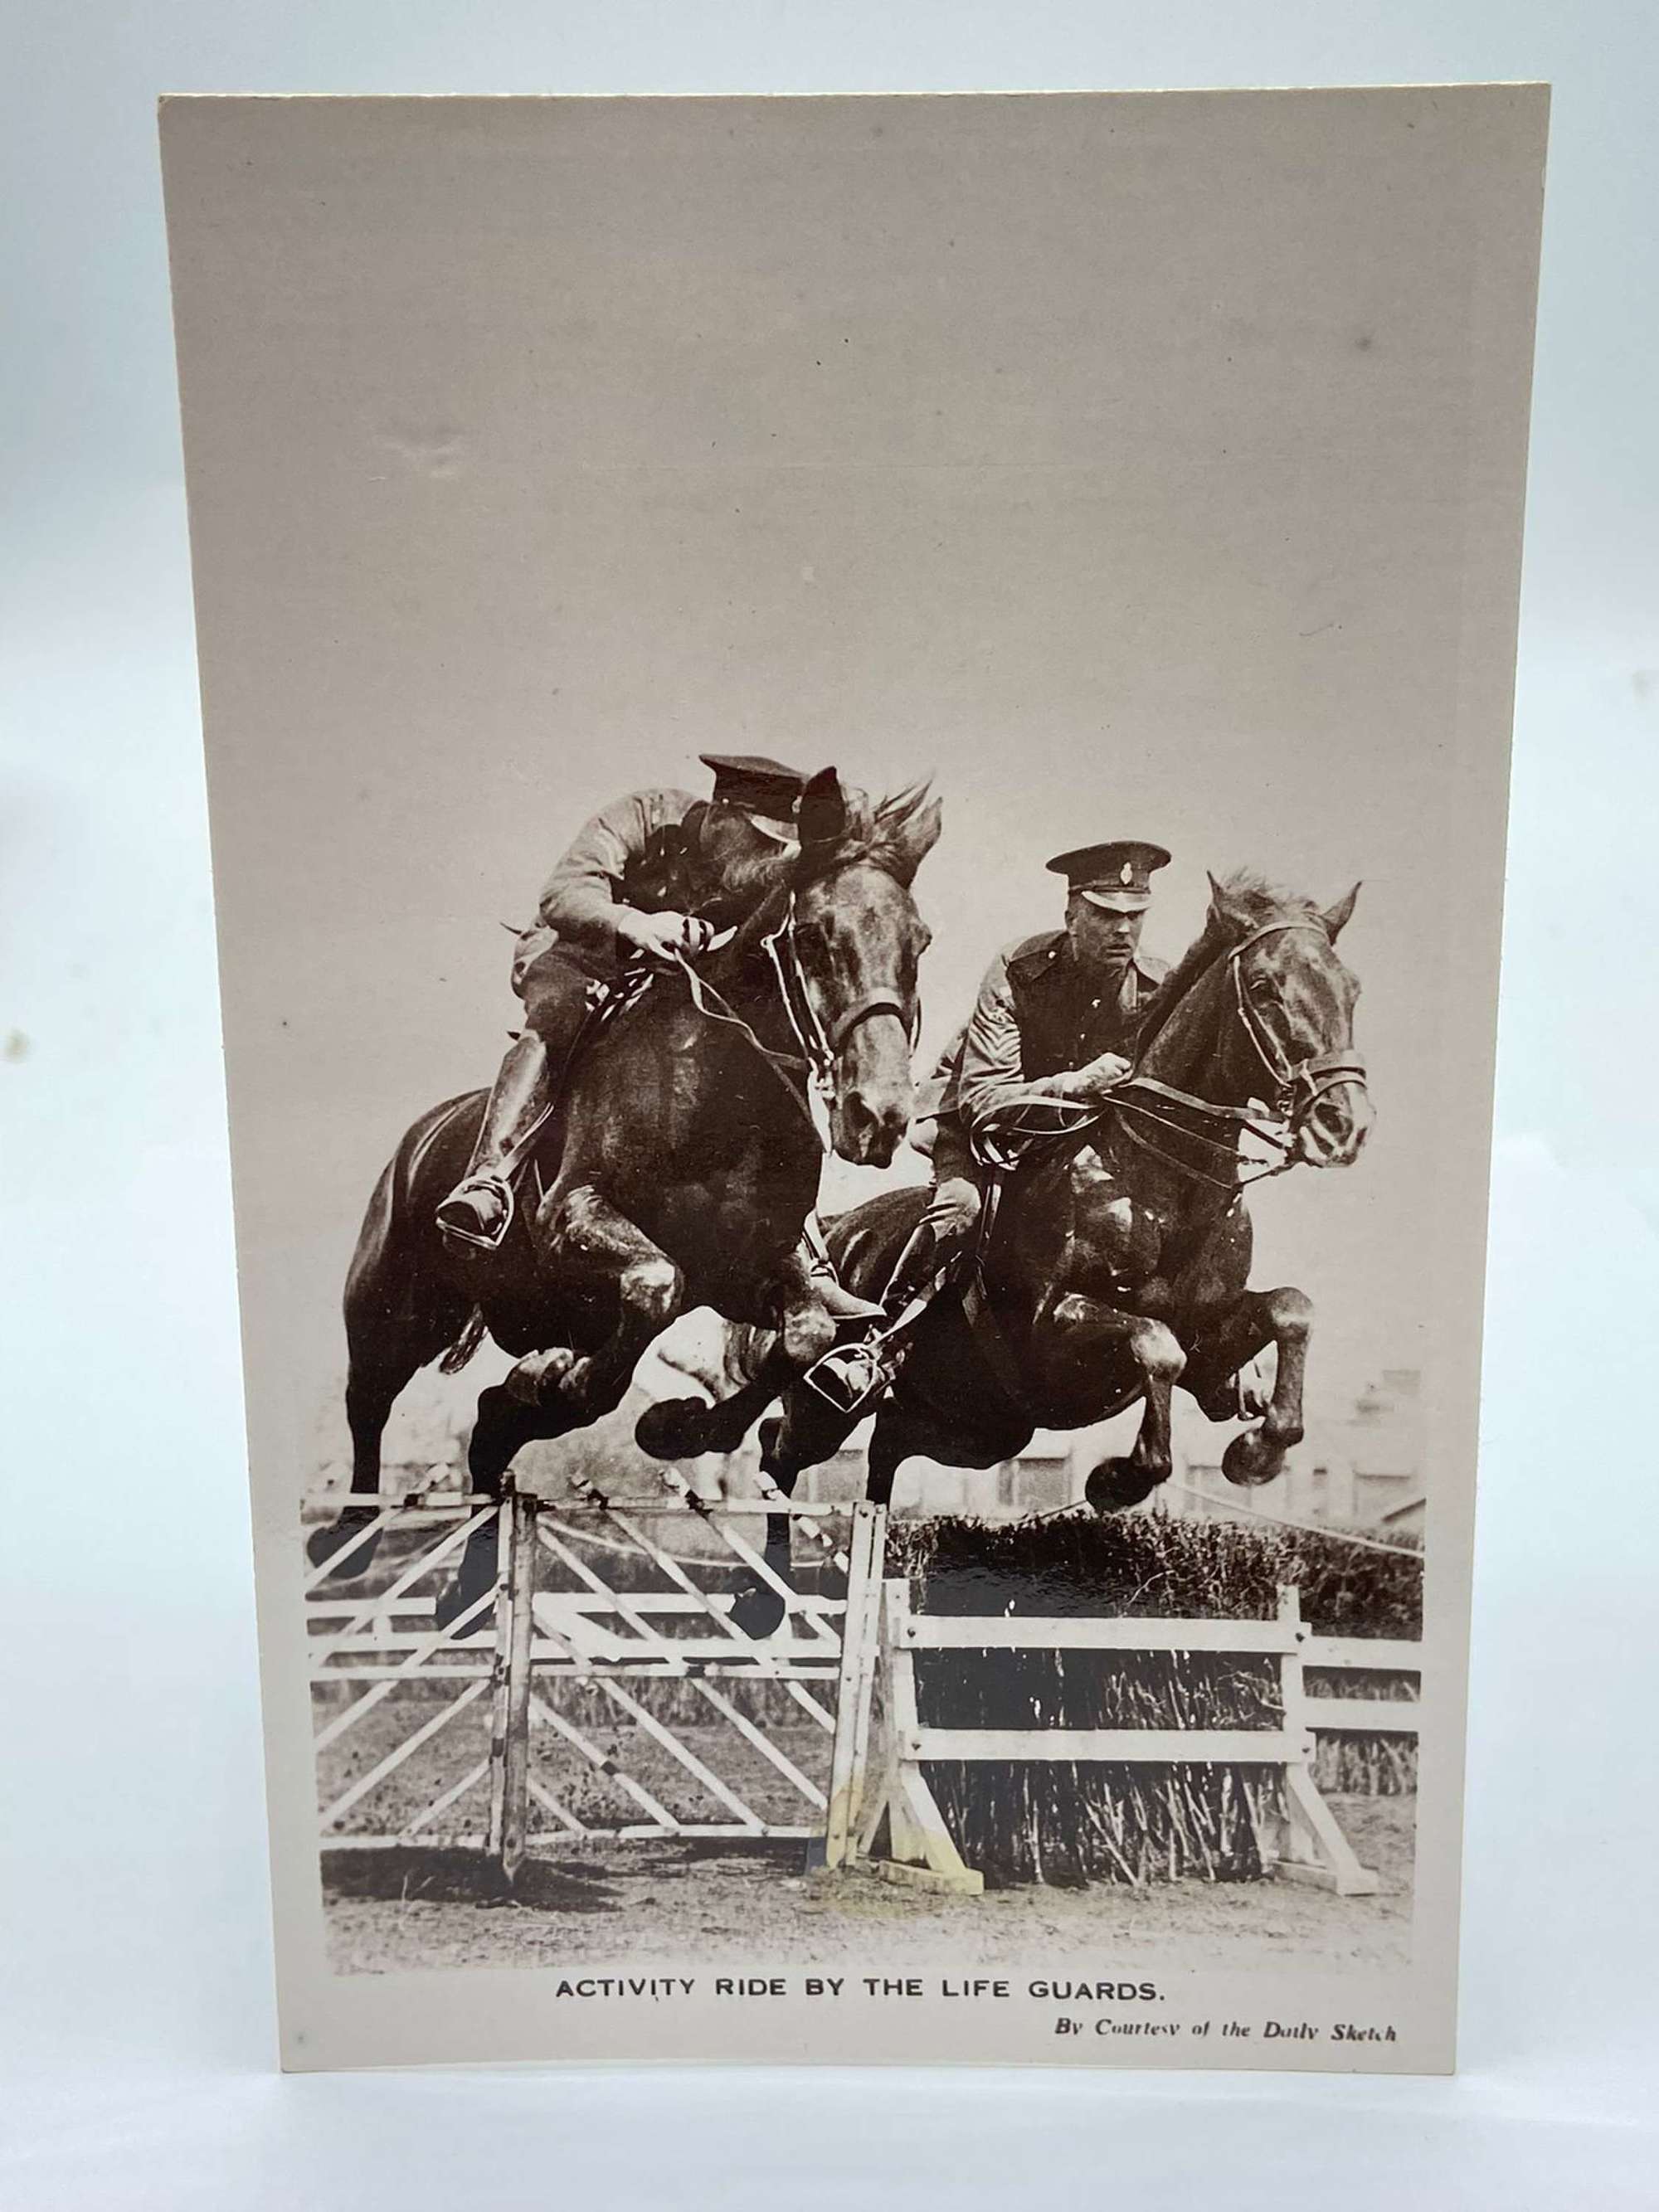 WW1 Period Activity Ride By The Life Guards Photographic Postcard